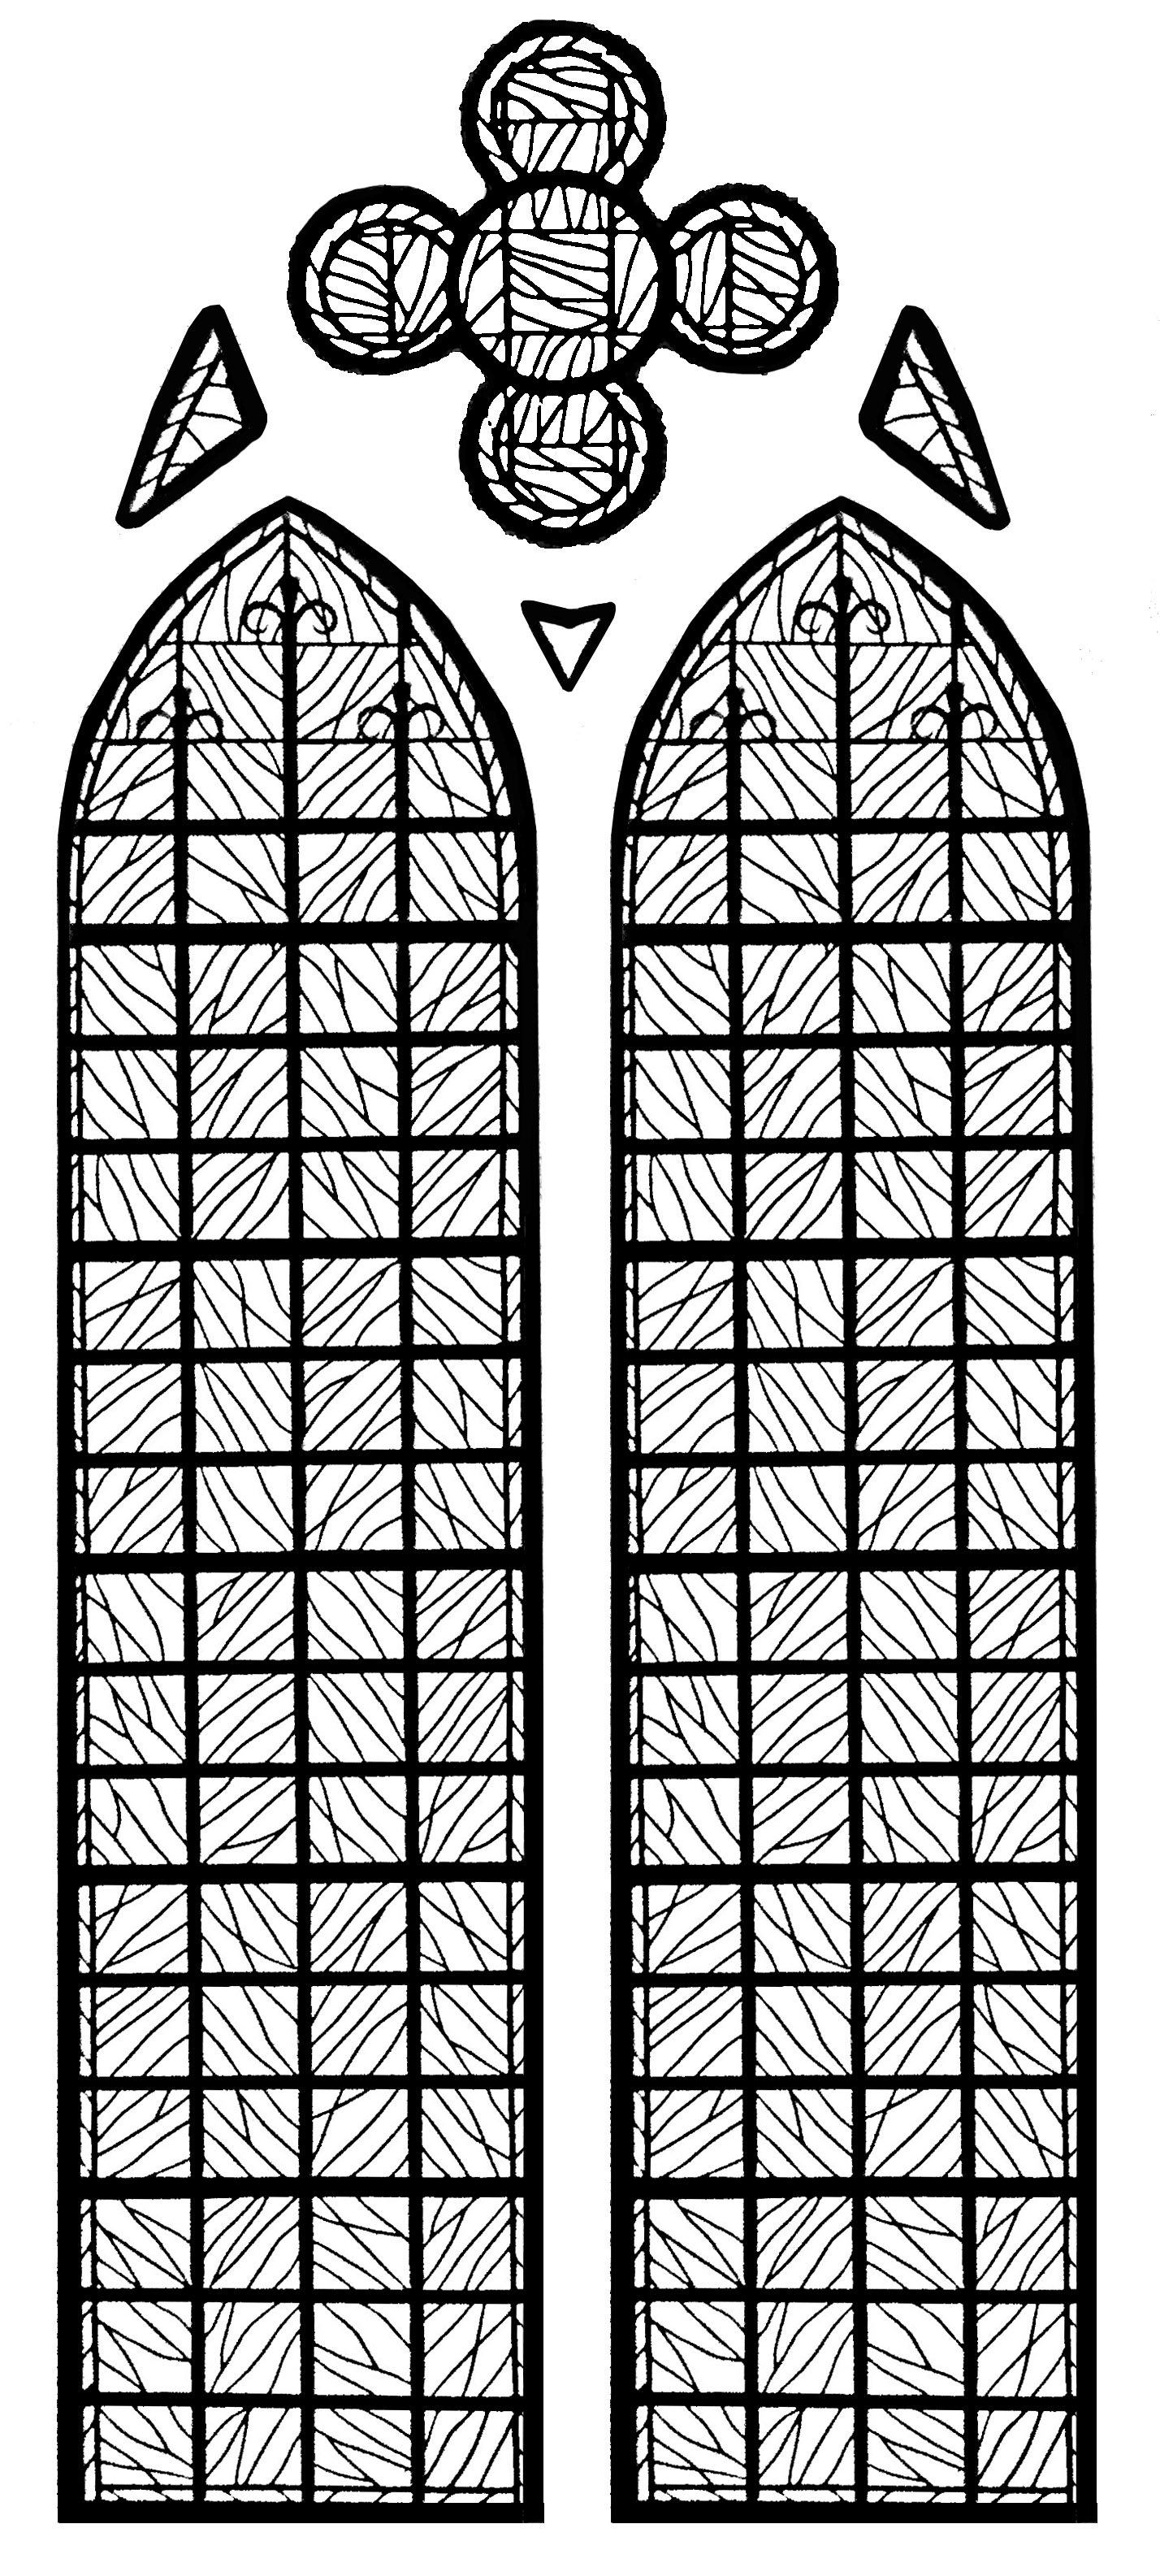 Coloring page made from a modern Stained glass : Chapelle Château Yverdon les bains (France)